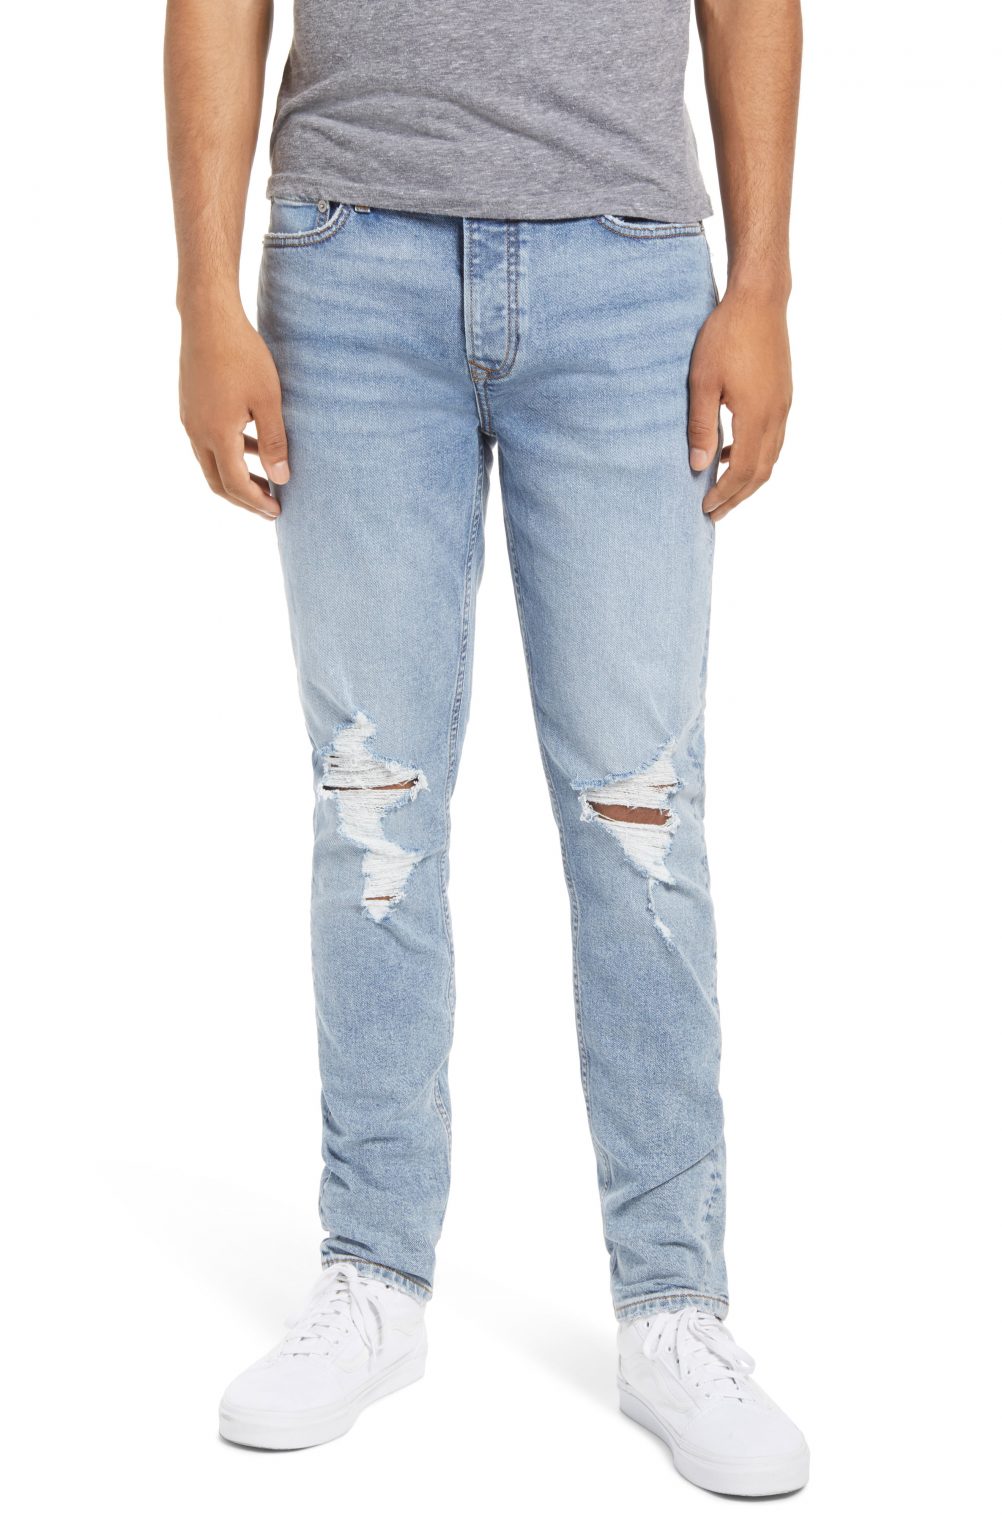 Men’s Topman Blowout Ripped Skinny Jeans, Size 30 x 30 - Blue | The ...